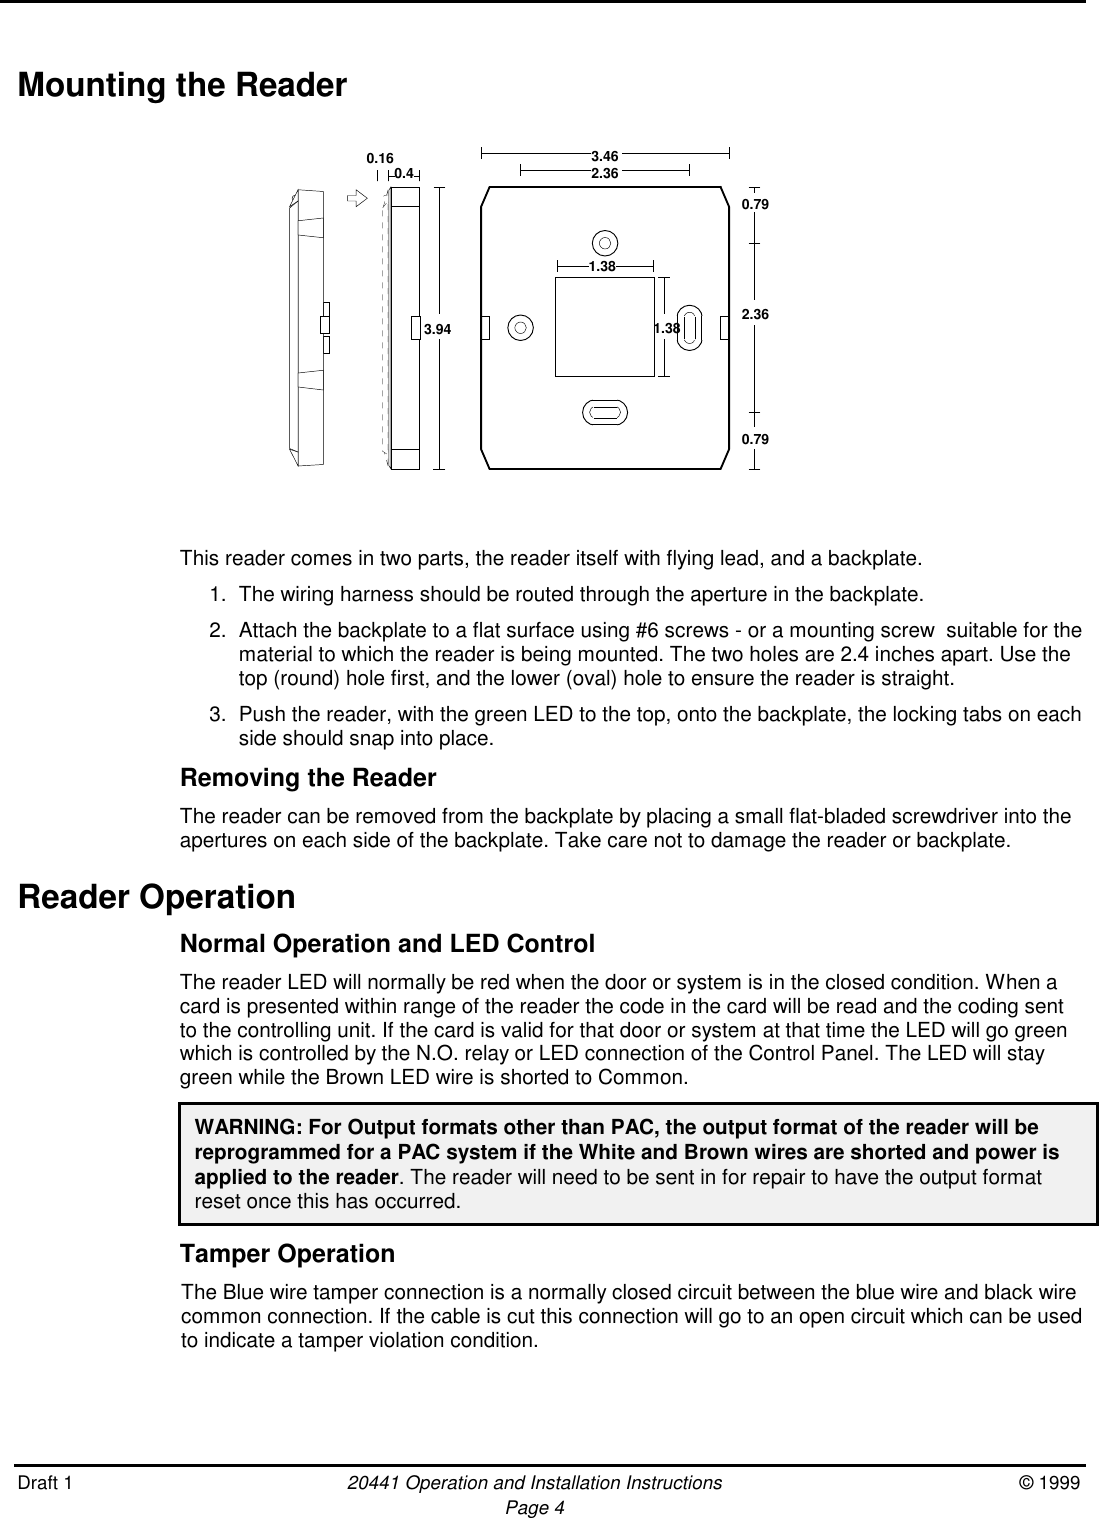 Draft 1 20441 Operation and Installation Instructions © 1999Page 4Mounting the ReaderThis reader comes in two parts, the reader itself with flying lead, and a backplate.1. The wiring harness should be routed through the aperture in the backplate.2. Attach the backplate to a flat surface using #6 screws - or a mounting screw  suitable for thematerial to which the reader is being mounted. The two holes are 2.4 inches apart. Use thetop (round) hole first, and the lower (oval) hole to ensure the reader is straight.3. Push the reader, with the green LED to the top, onto the backplate, the locking tabs on eachside should snap into place.Removing the ReaderThe reader can be removed from the backplate by placing a small flat-bladed screwdriver into theapertures on each side of the backplate. Take care not to damage the reader or backplate.Reader OperationNormal Operation and LED ControlThe reader LED will normally be red when the door or system is in the closed condition. When acard is presented within range of the reader the code in the card will be read and the coding sentto the controlling unit. If the card is valid for that door or system at that time the LED will go greenwhich is controlled by the N.O. relay or LED connection of the Control Panel. The LED will staygreen while the Brown LED wire is shorted to Common.WARNING: For Output formats other than PAC, the output format of the reader will bereprogrammed for a PAC system if the White and Brown wires are shorted and power isapplied to the reader. The reader will need to be sent in for repair to have the output formatreset once this has occurred.Tamper OperationThe Blue wire tamper connection is a normally closed circuit between the blue wire and black wirecommon connection. If the cable is cut this connection will go to an open circuit which can be usedto indicate a tamper violation condition.3.940.42.363.460.790.790.16 2.361.381.38